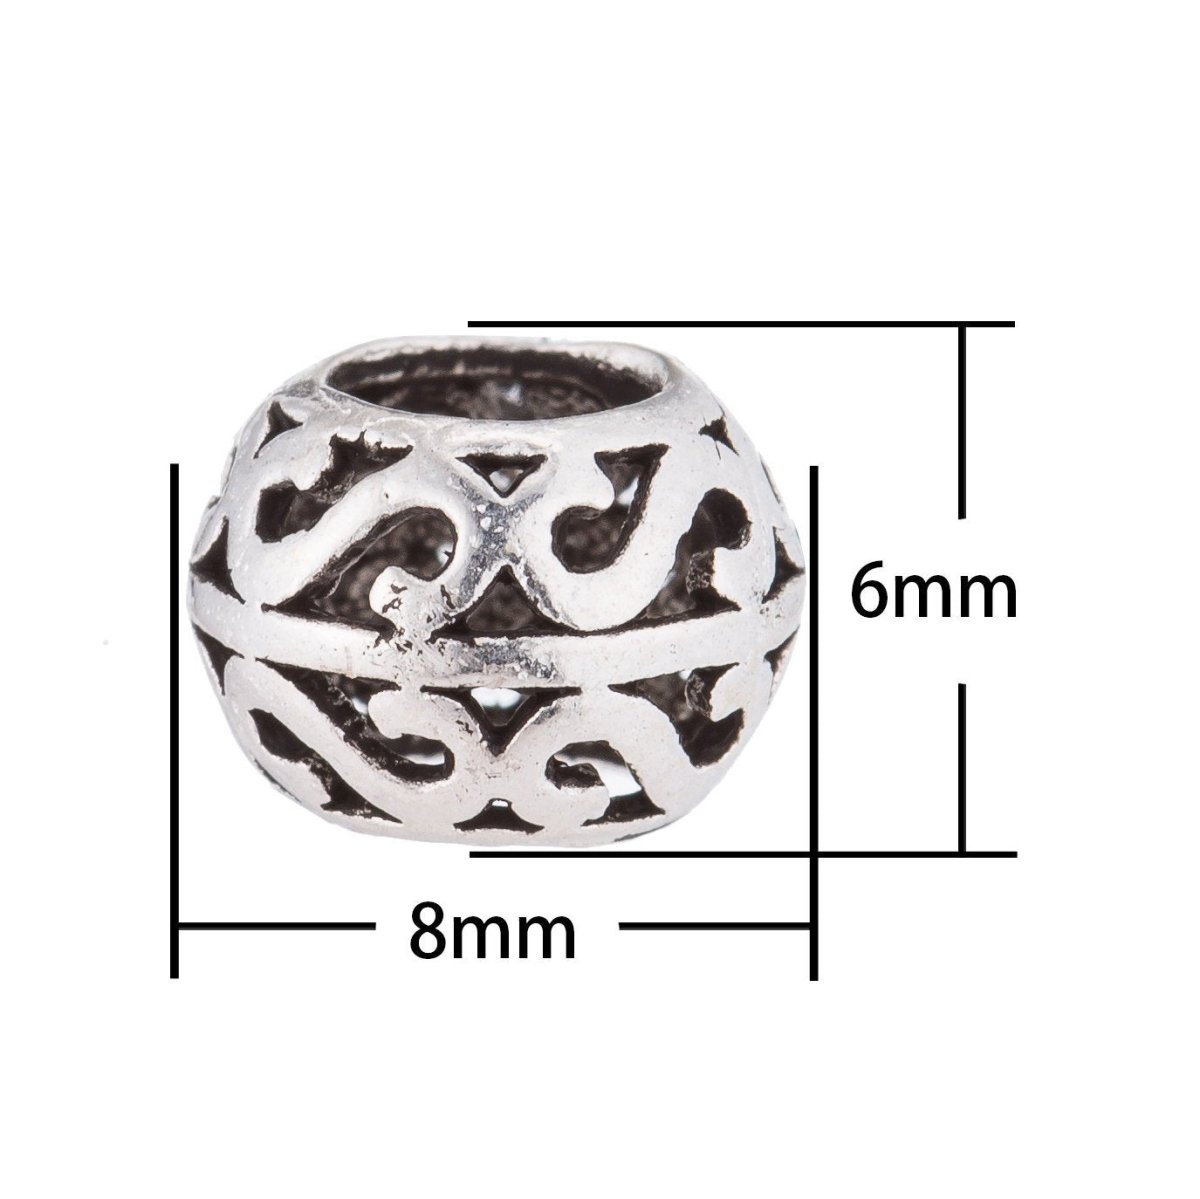 Pandora 925 Sterling Silver Spacer, Infinity, European Style, Bracelet Charm Bead Spacer Connector Pendant Finding For Jewelry Making G-596 - DLUXCA